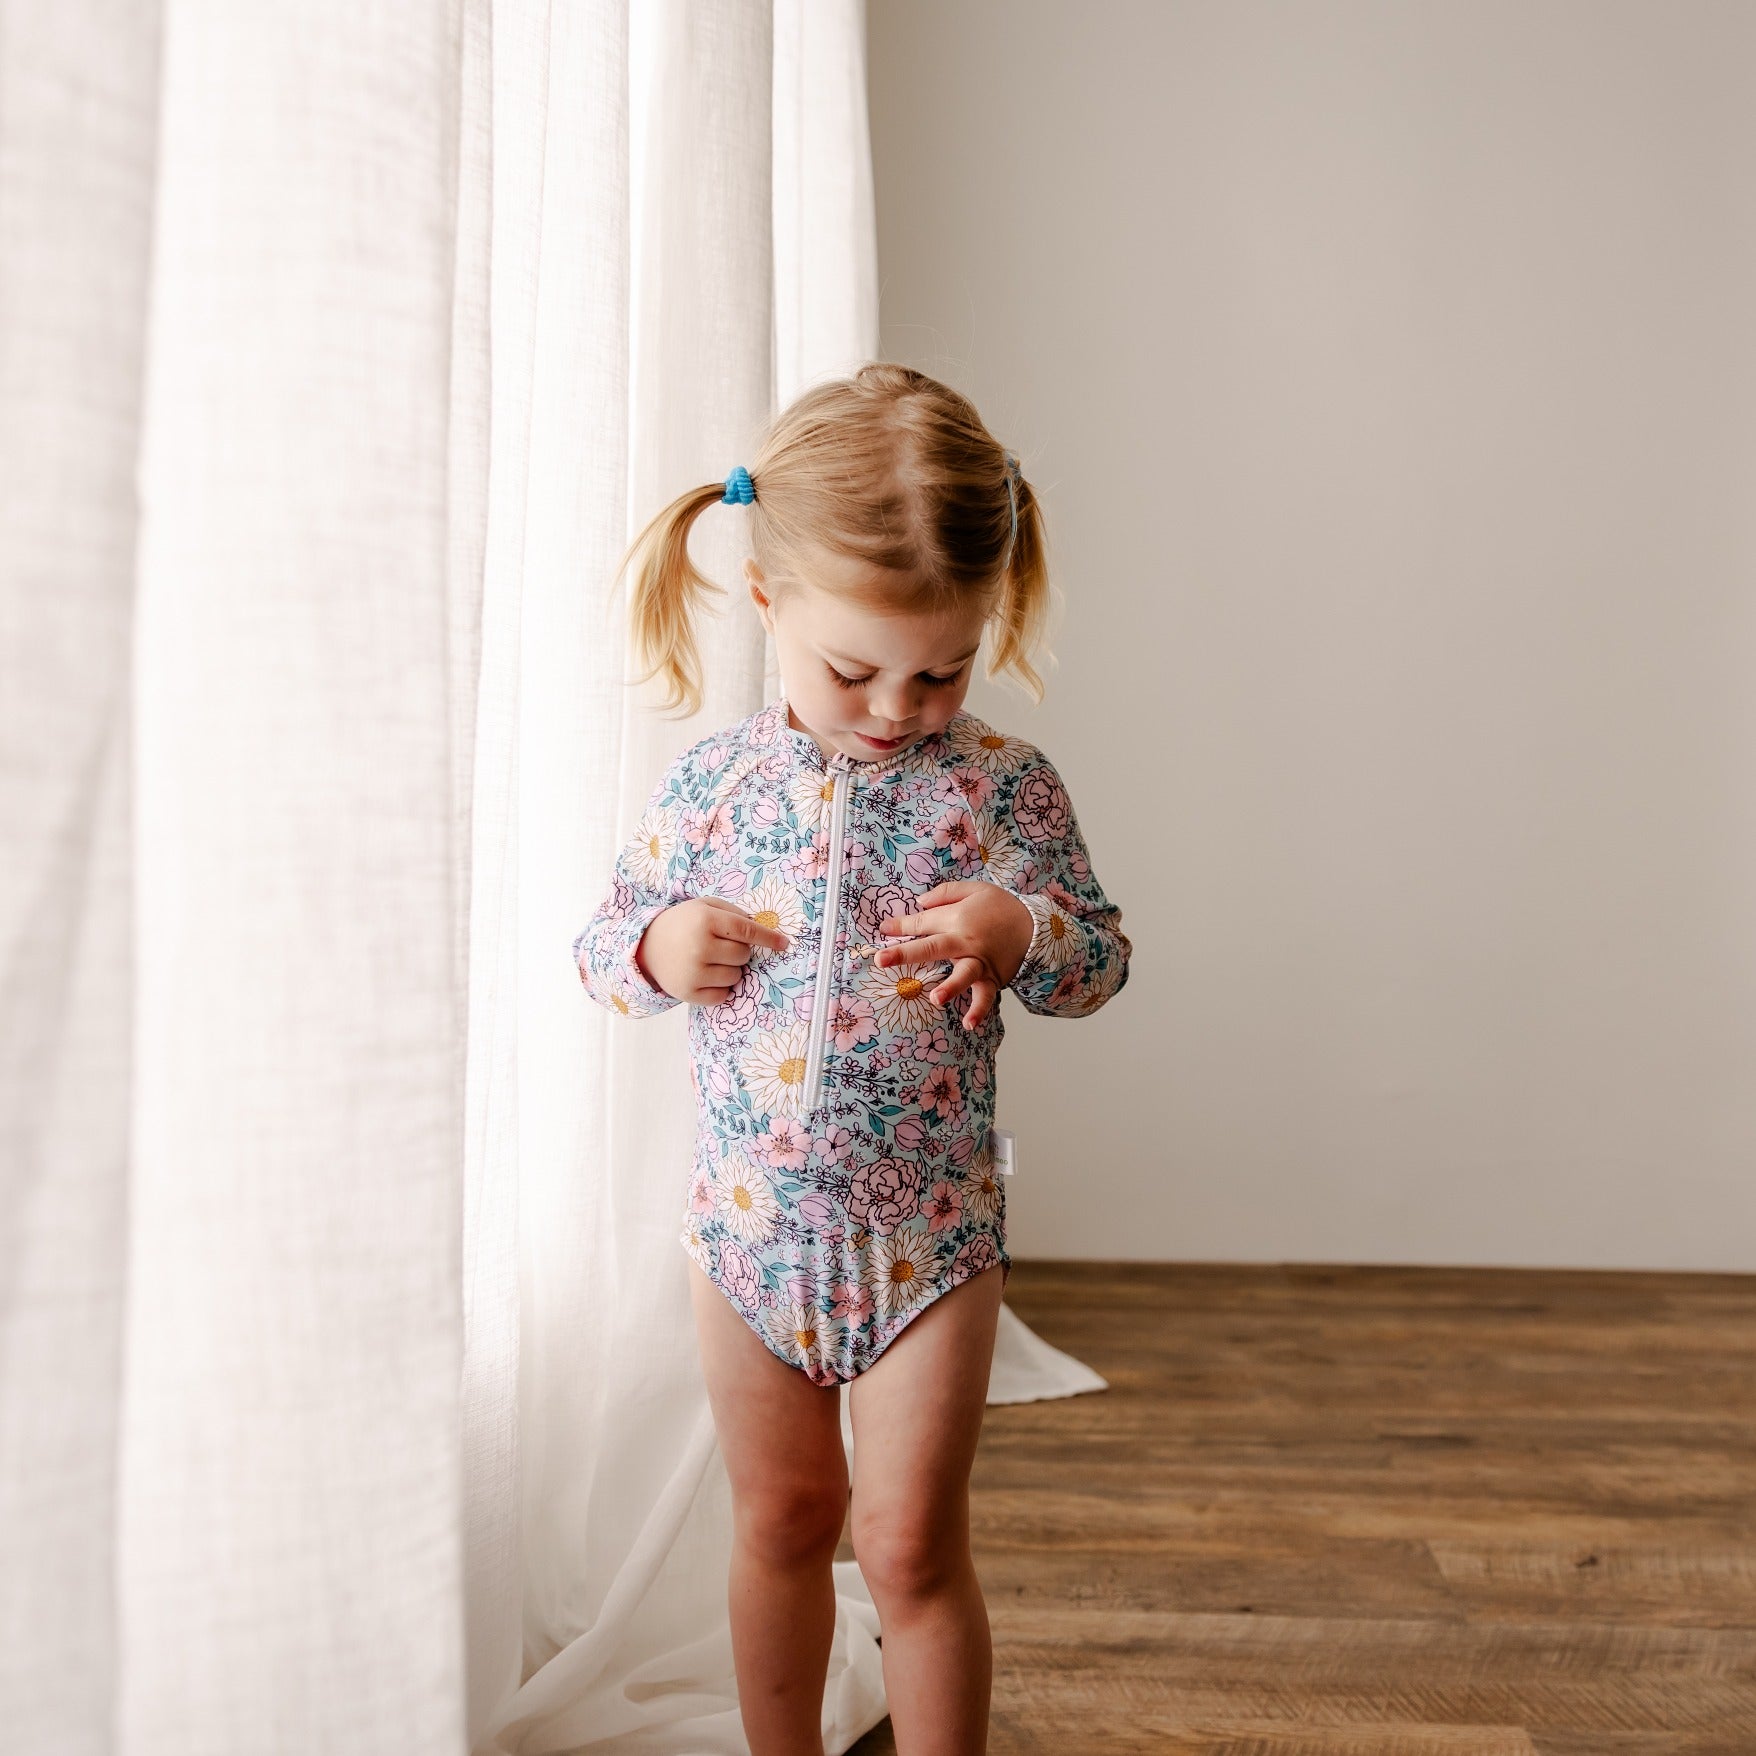 Bear & Moo Swimsuits | Harper in Boho Floral | available at Bear & Moo